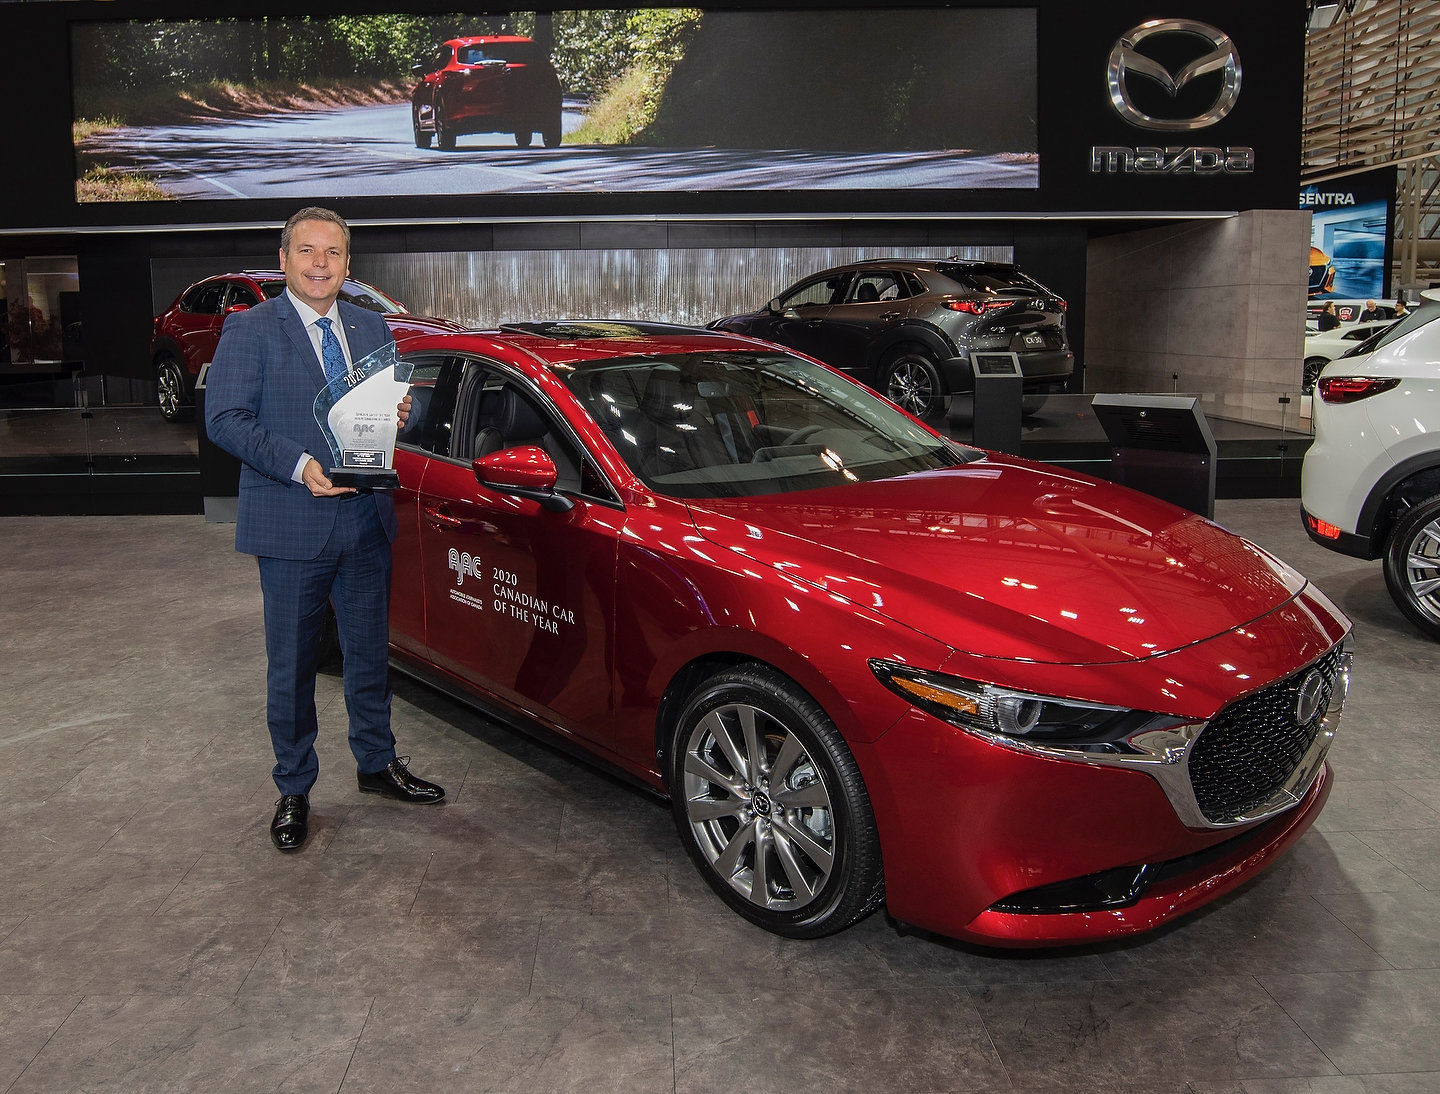 The 2020 Mazda3 wins AJAC Canadian Car of the Year Award